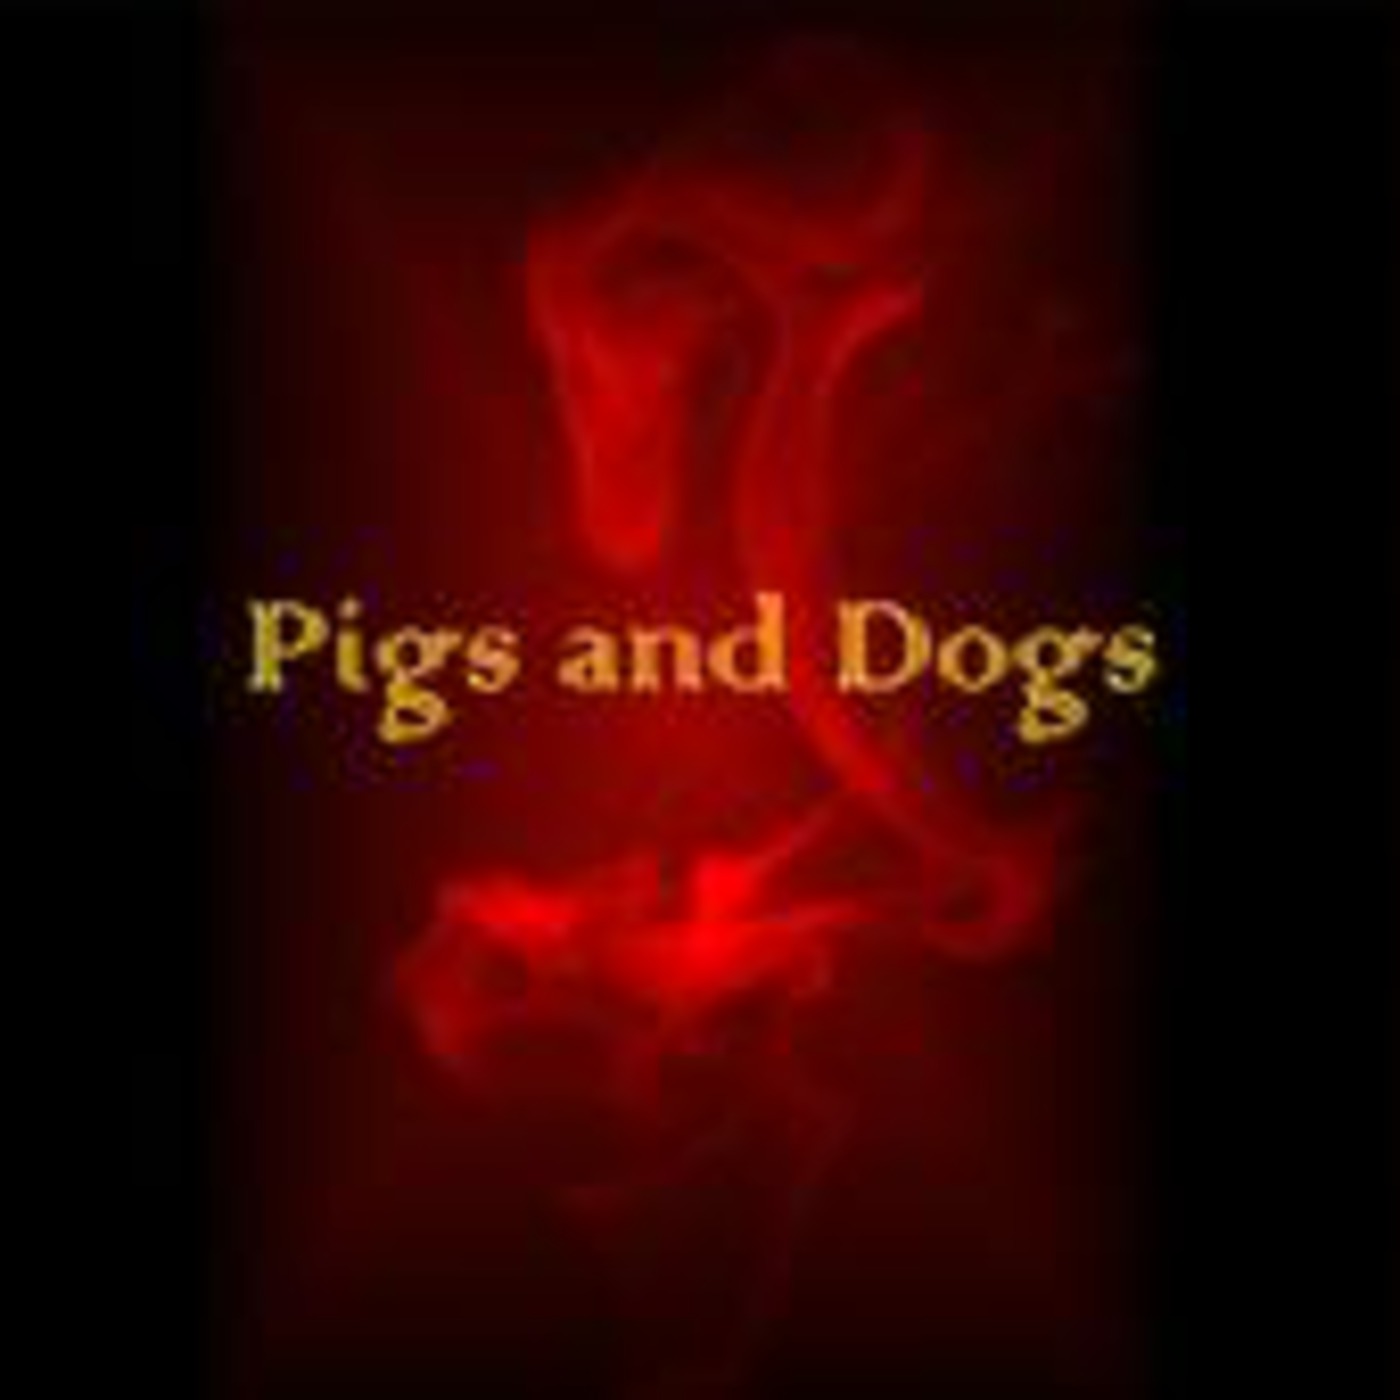 PIGS AND DOGS - Music Sampler